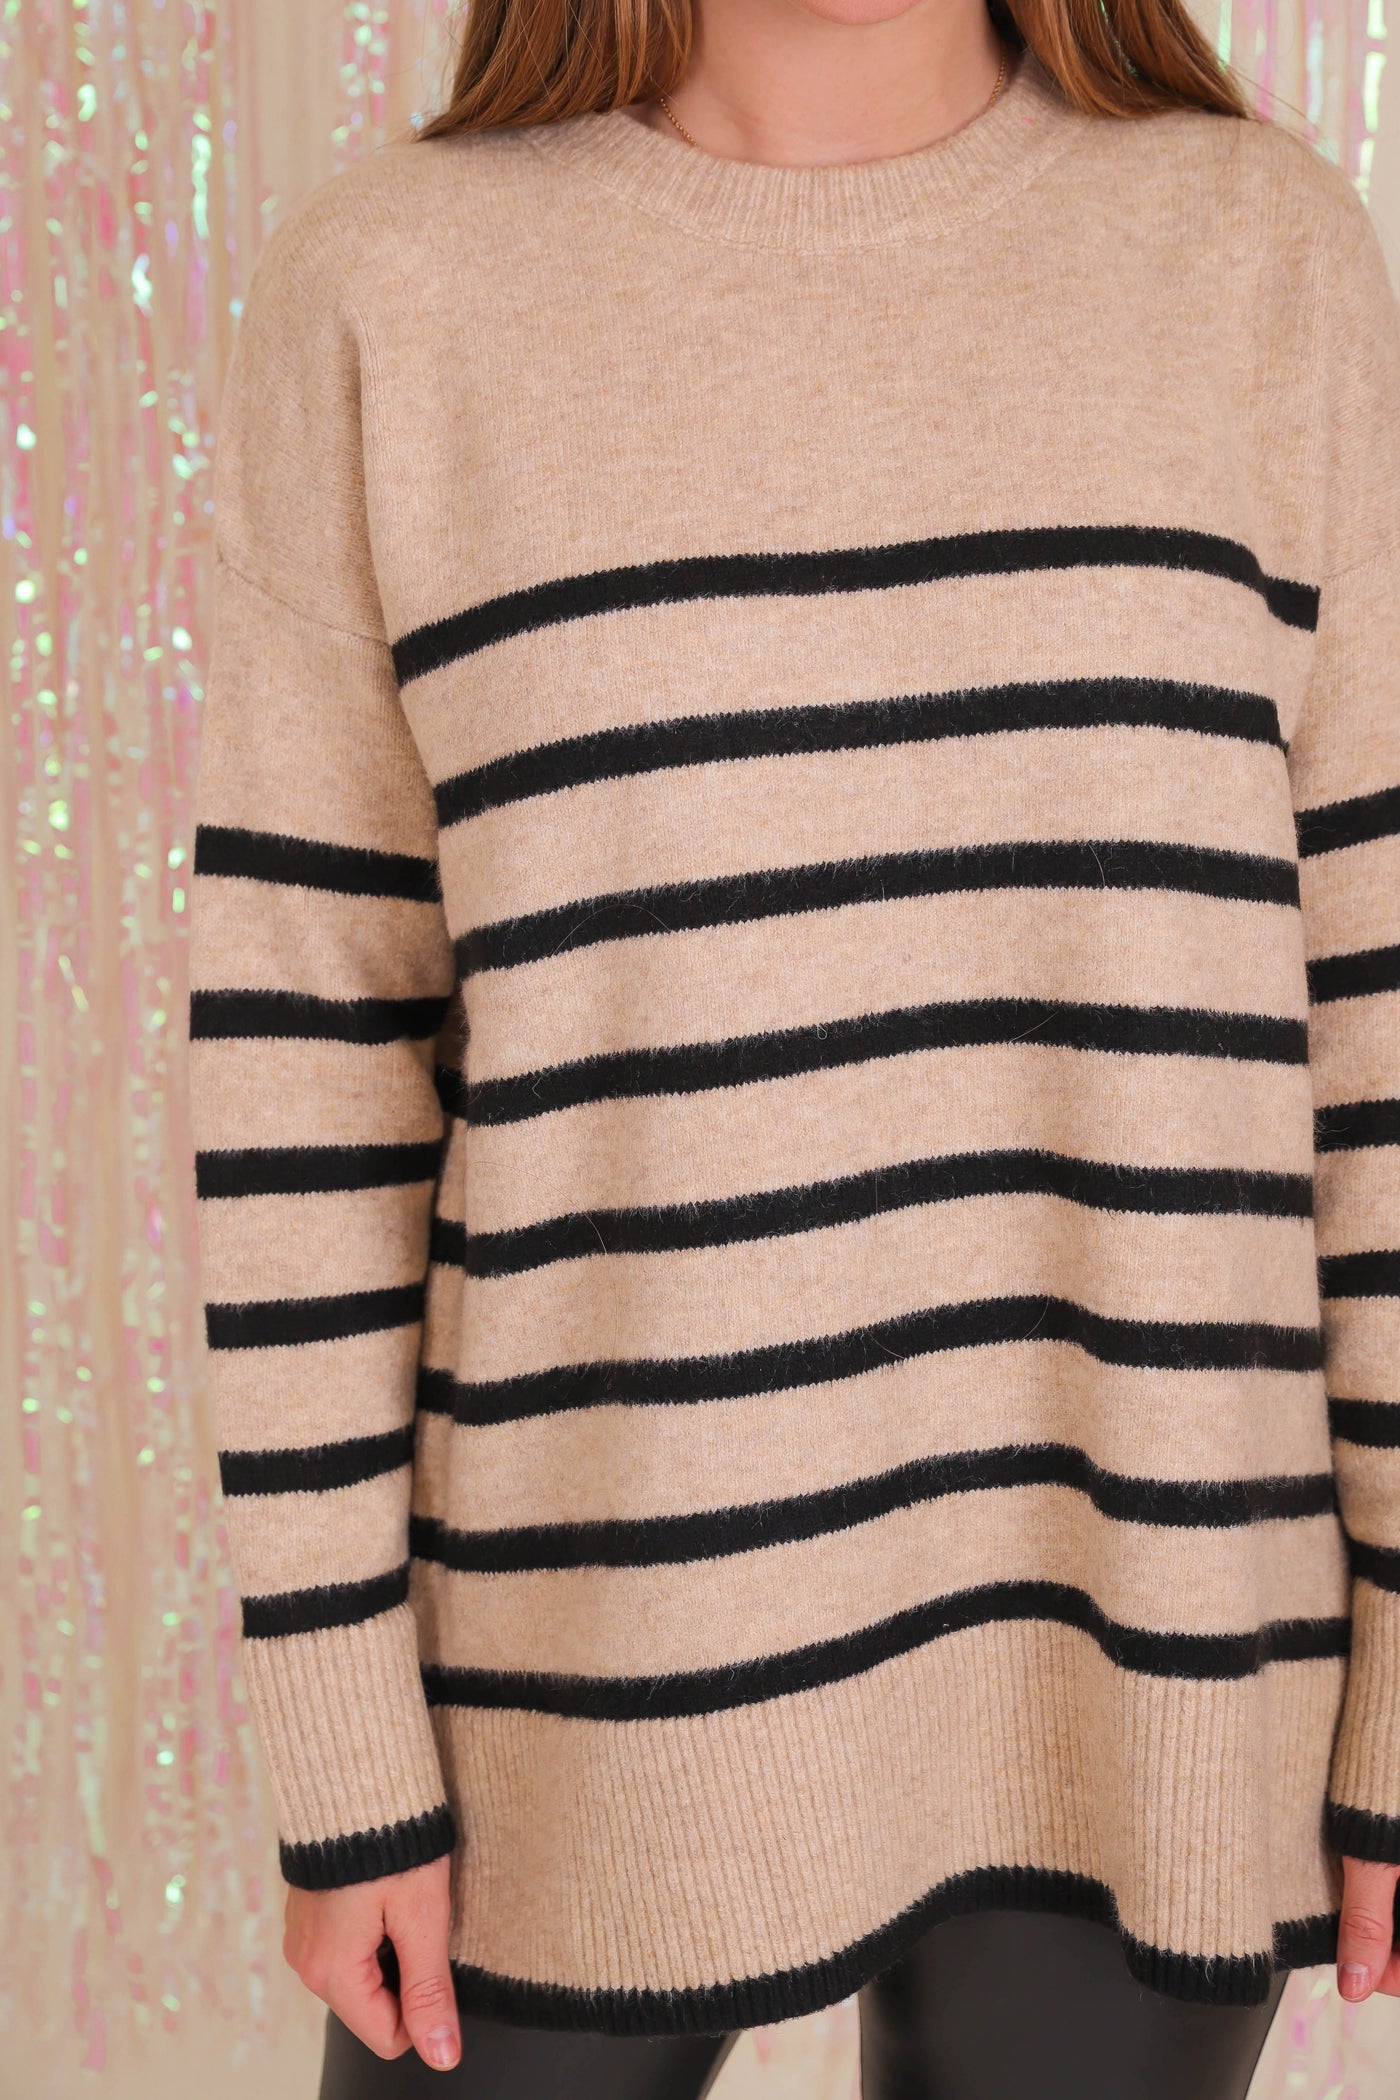 Women's Striped Oversized Sweater- Black and Taupe Stripe Sweater- Women's Preppy Stripe Sweater